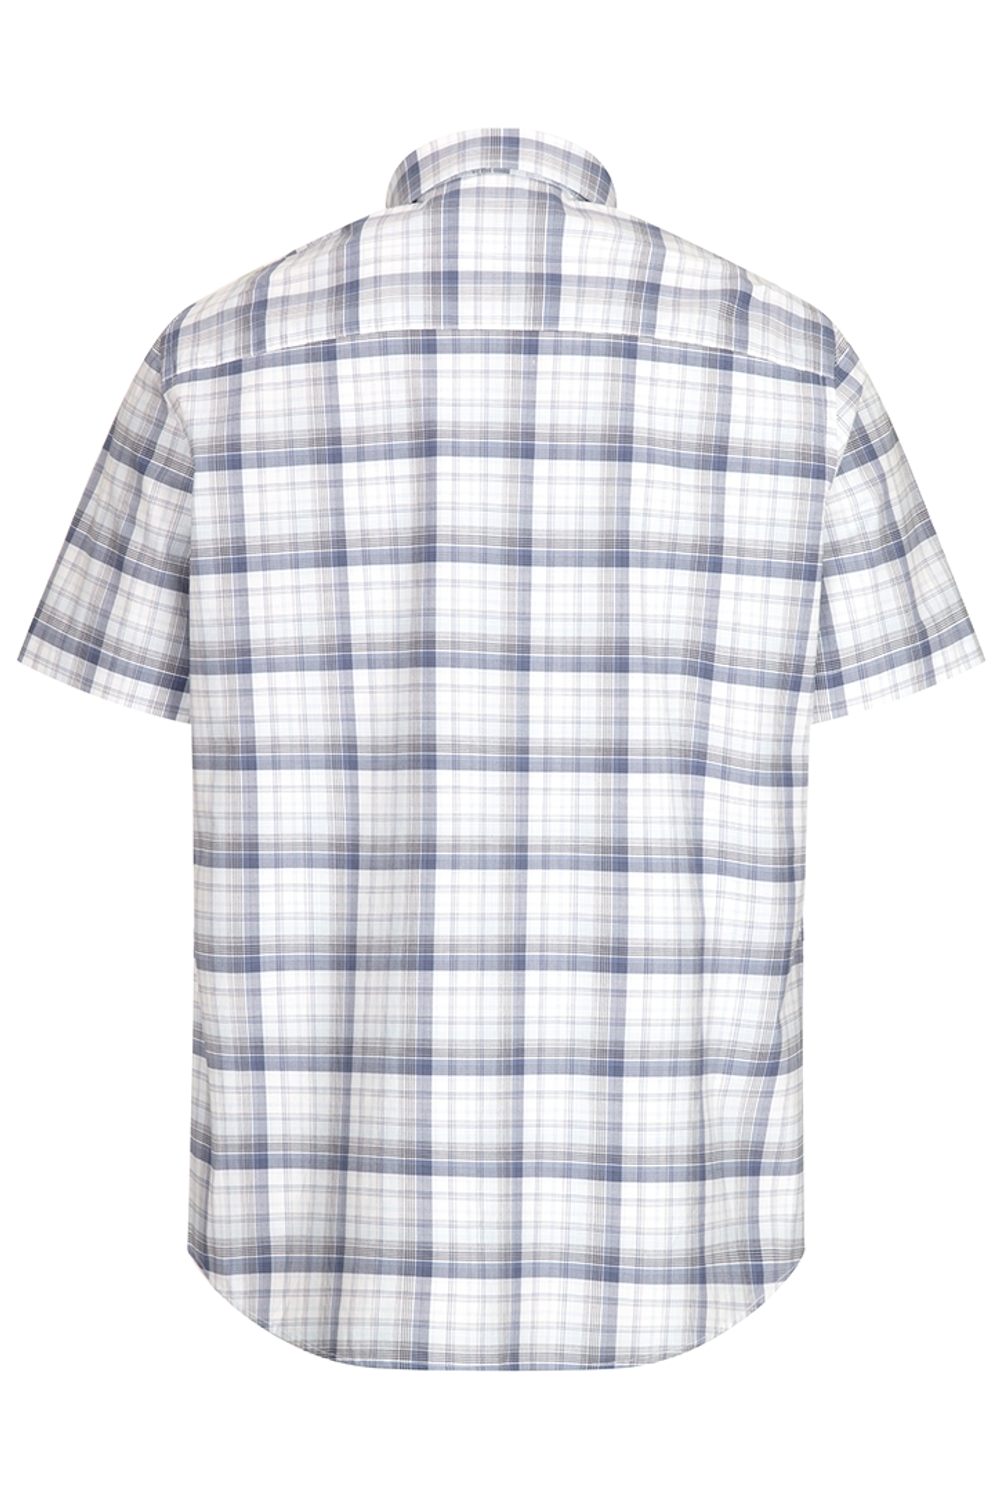 Hoggs Of Fife Tresness Short Sleeve Cotton Stretch Check Shirt in Blue Check 